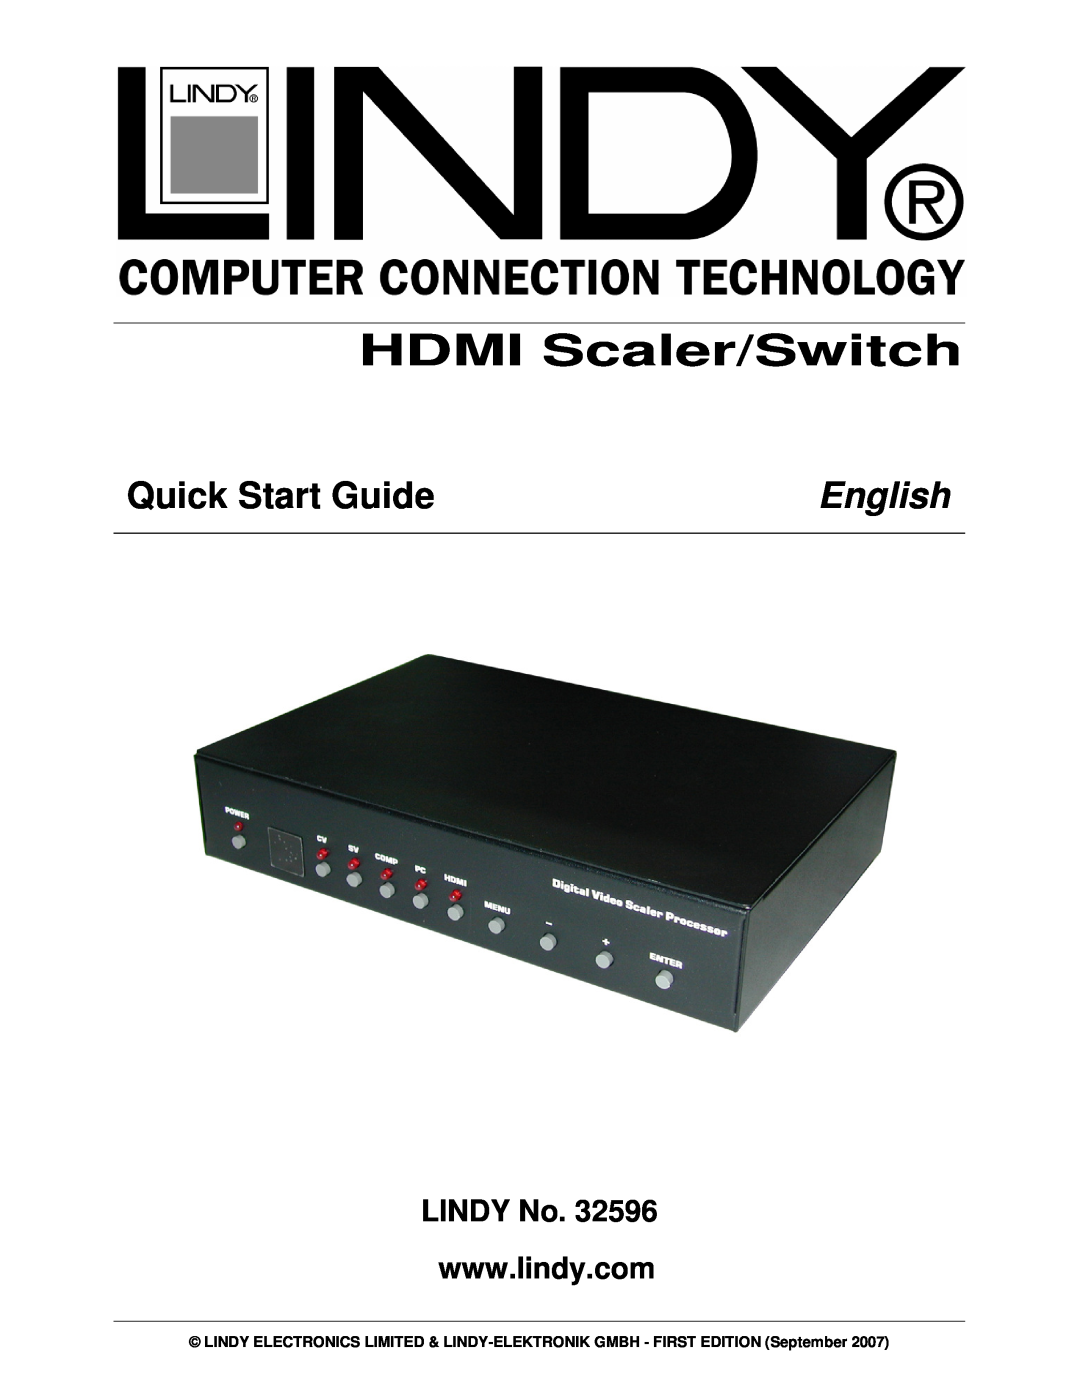 Lindy 32596 quick start HDMI Scaler/Switch, Quick Start Guide, English 